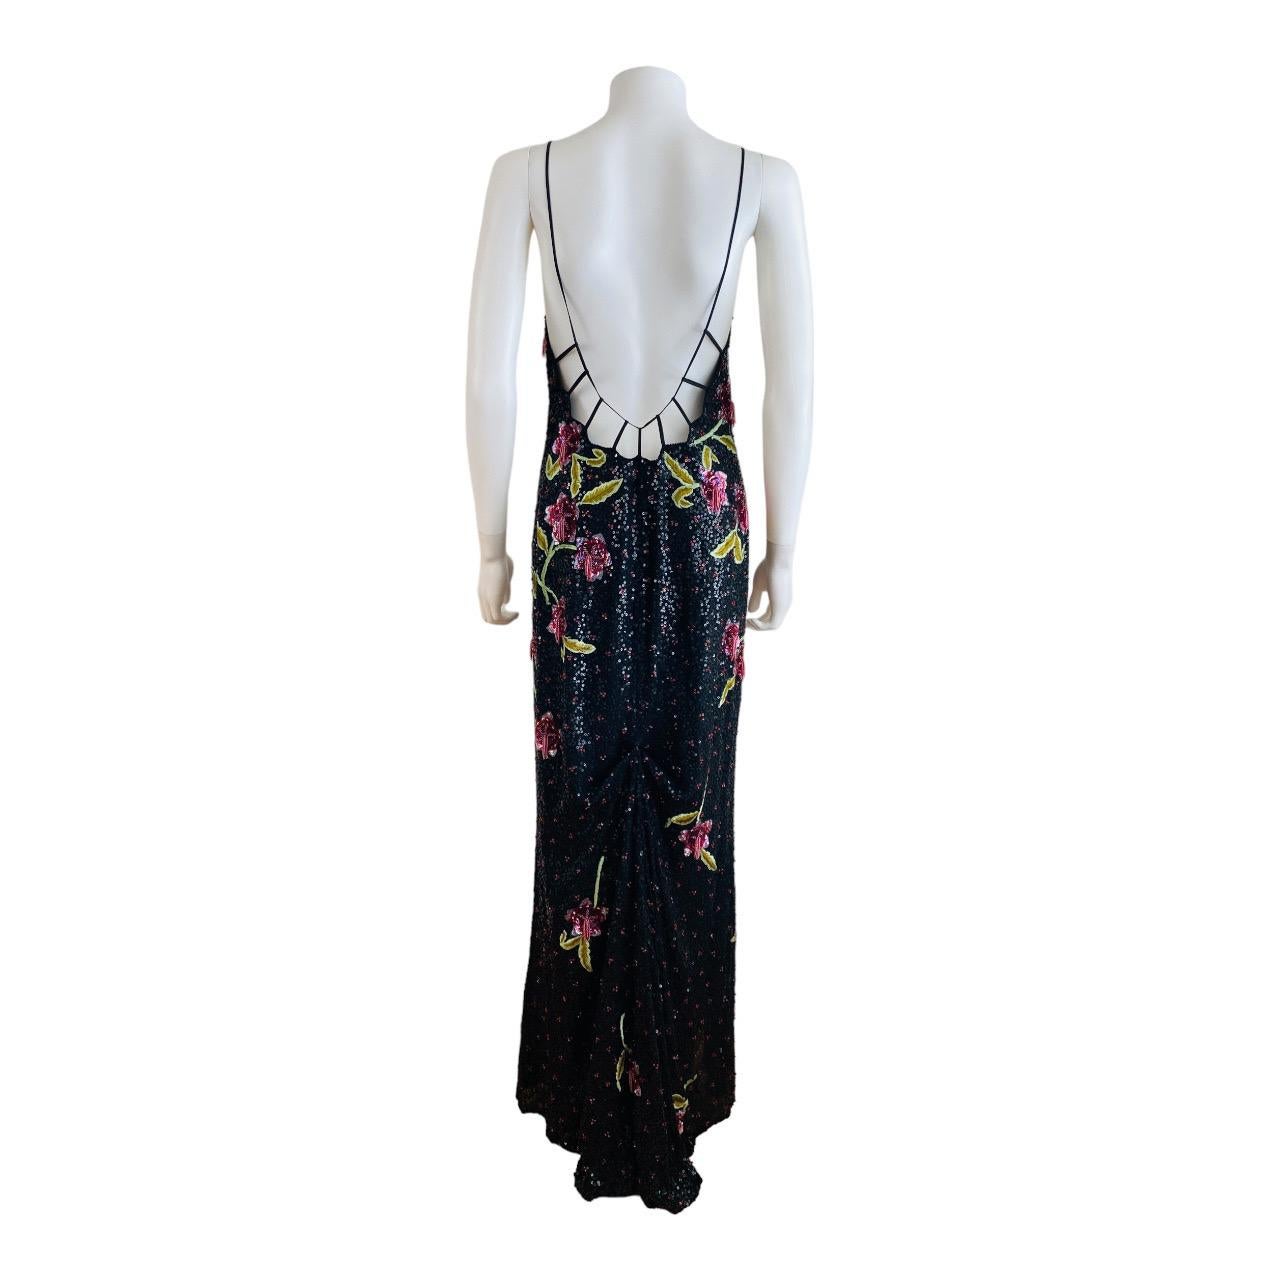 Vintage 2002 Escada Hand Beaded Sequin Floral Maxi Dress Gown Black Pink Flowers 5